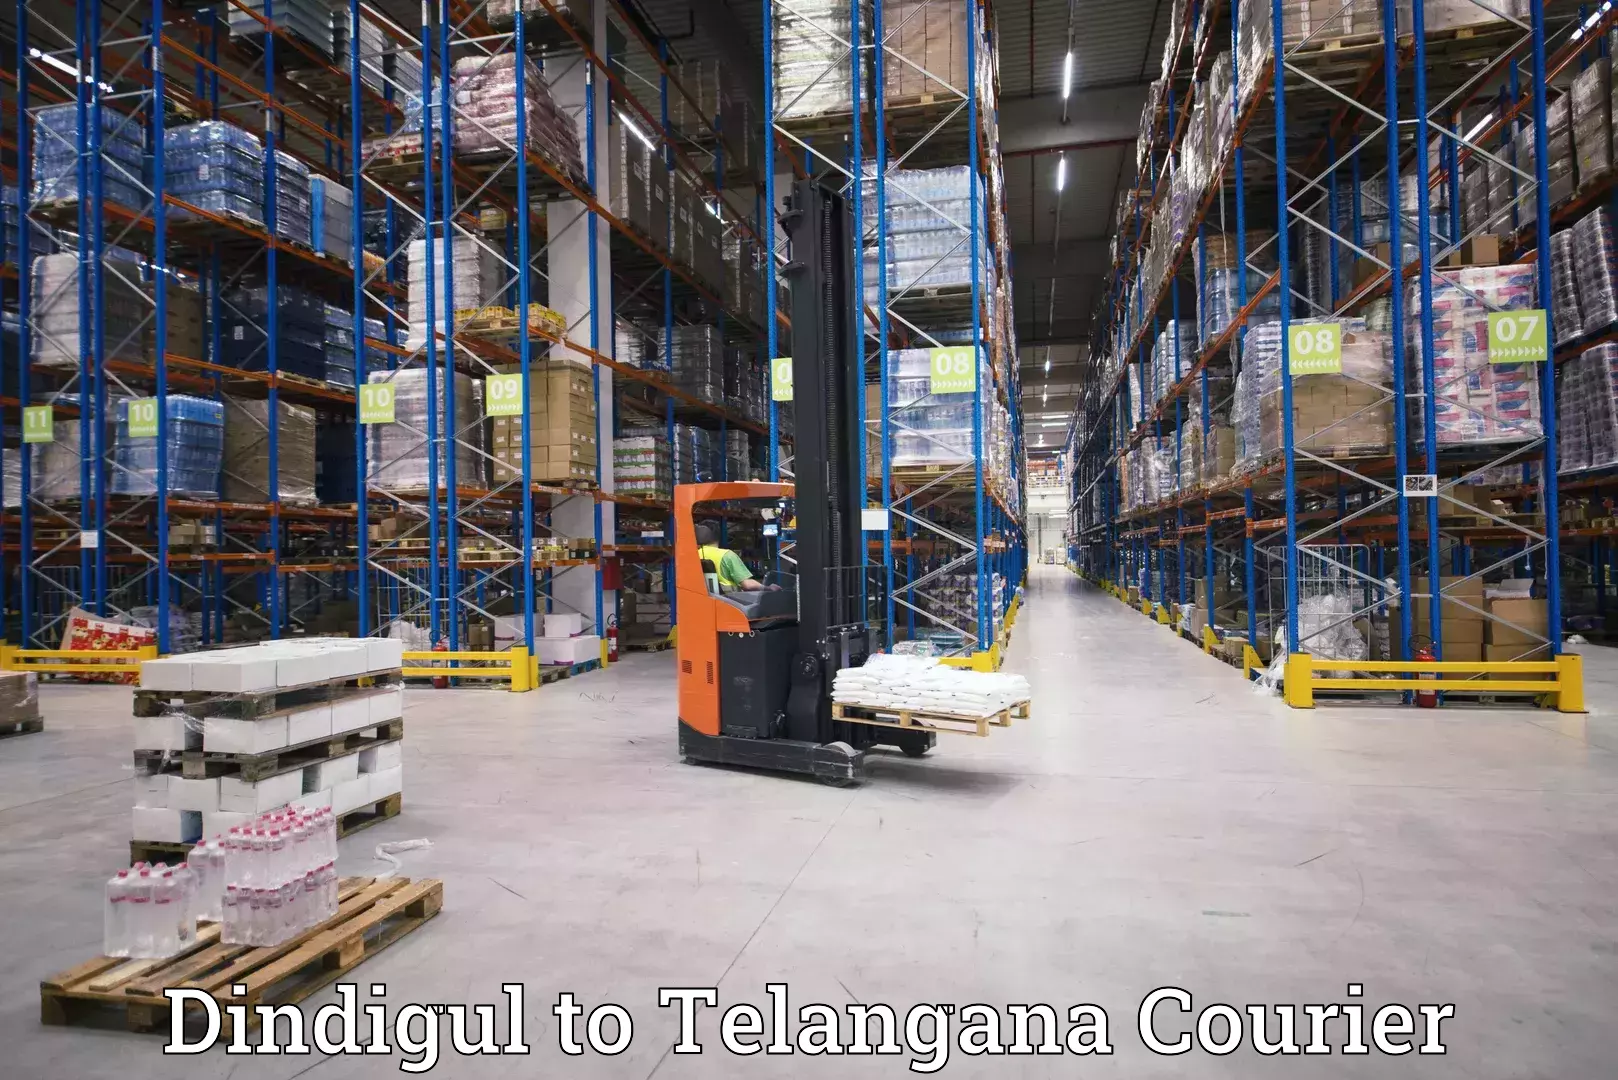 Courier service innovation Dindigul to Yellareddy